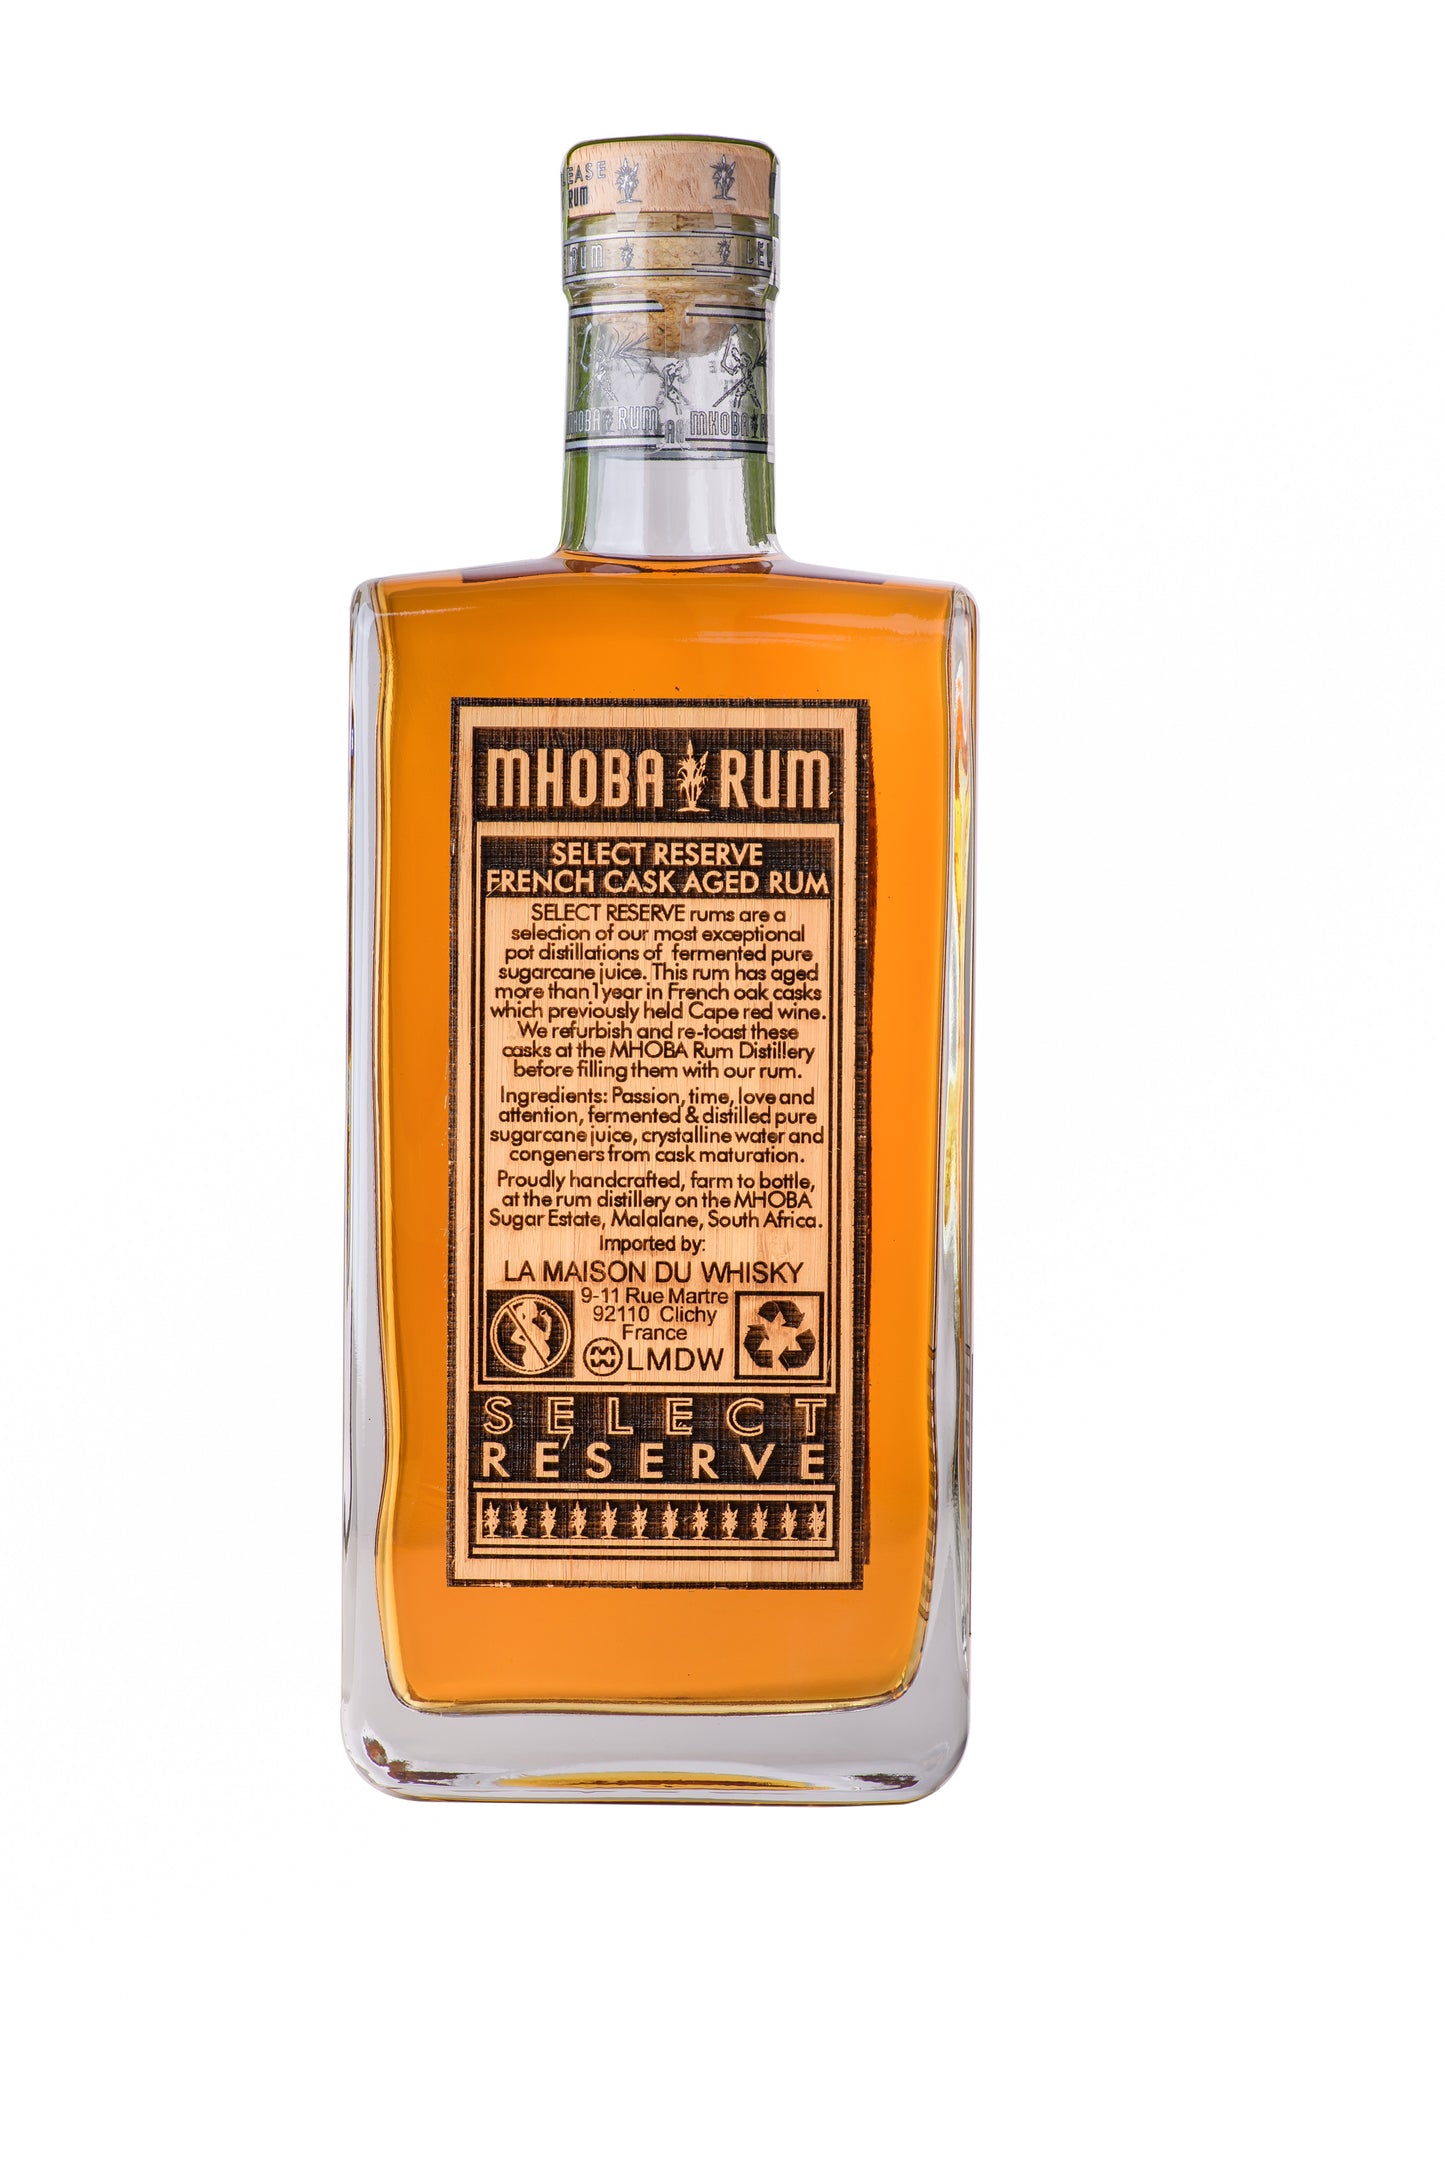 MHOBA French Cask Aged Rum 750ml 59% ABV